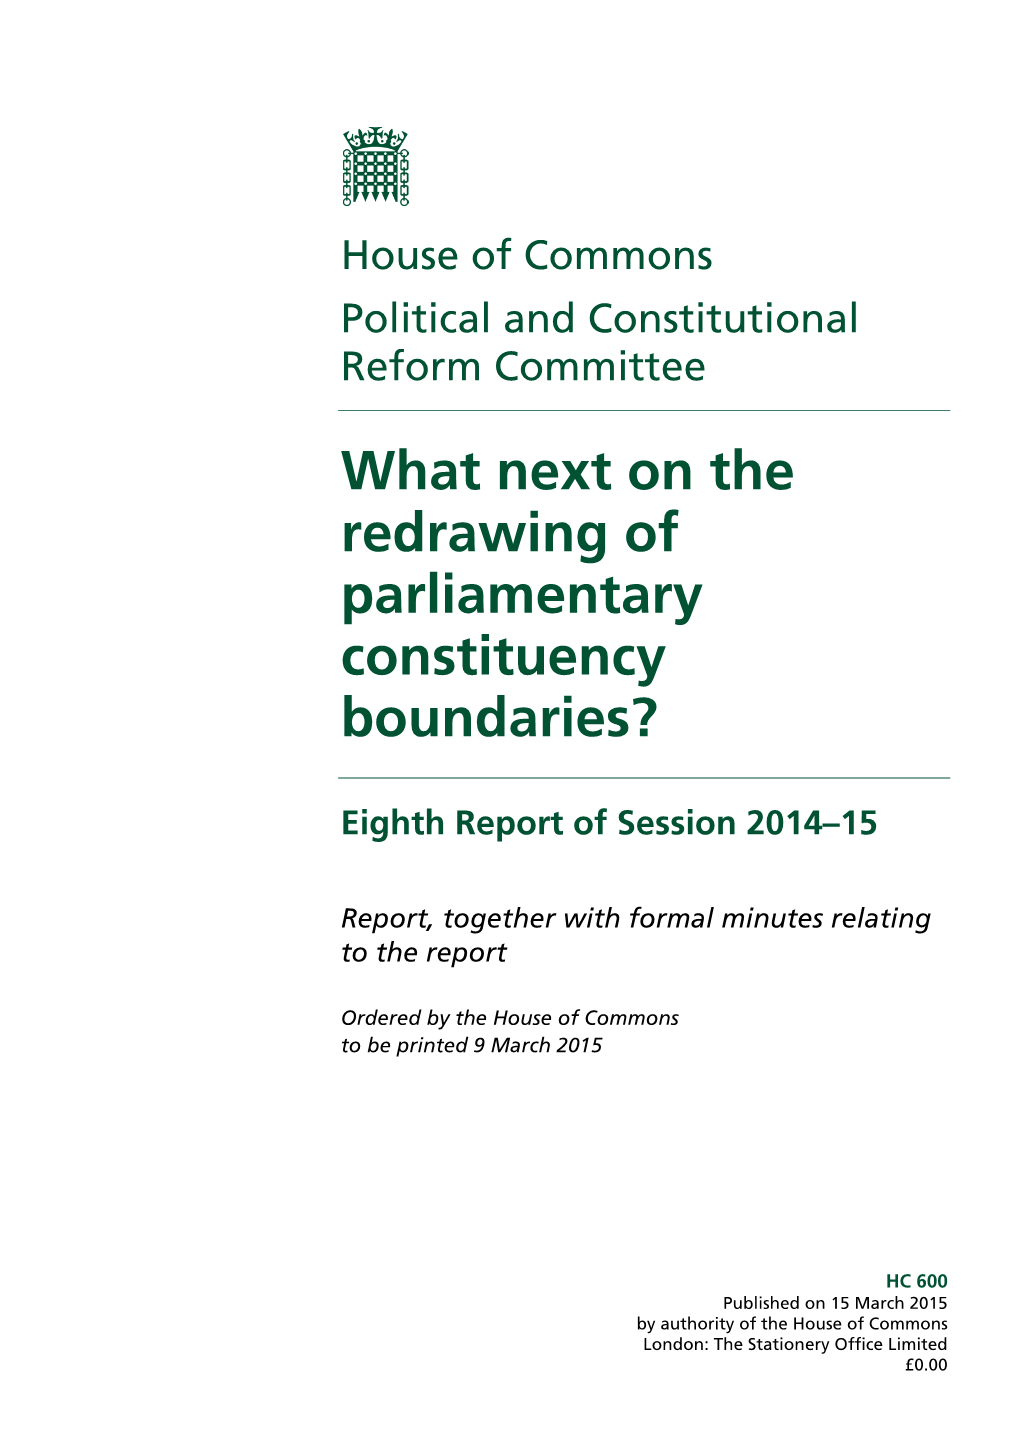 What Next on the Redrawing of Parliamentary Constituency Boundaries?